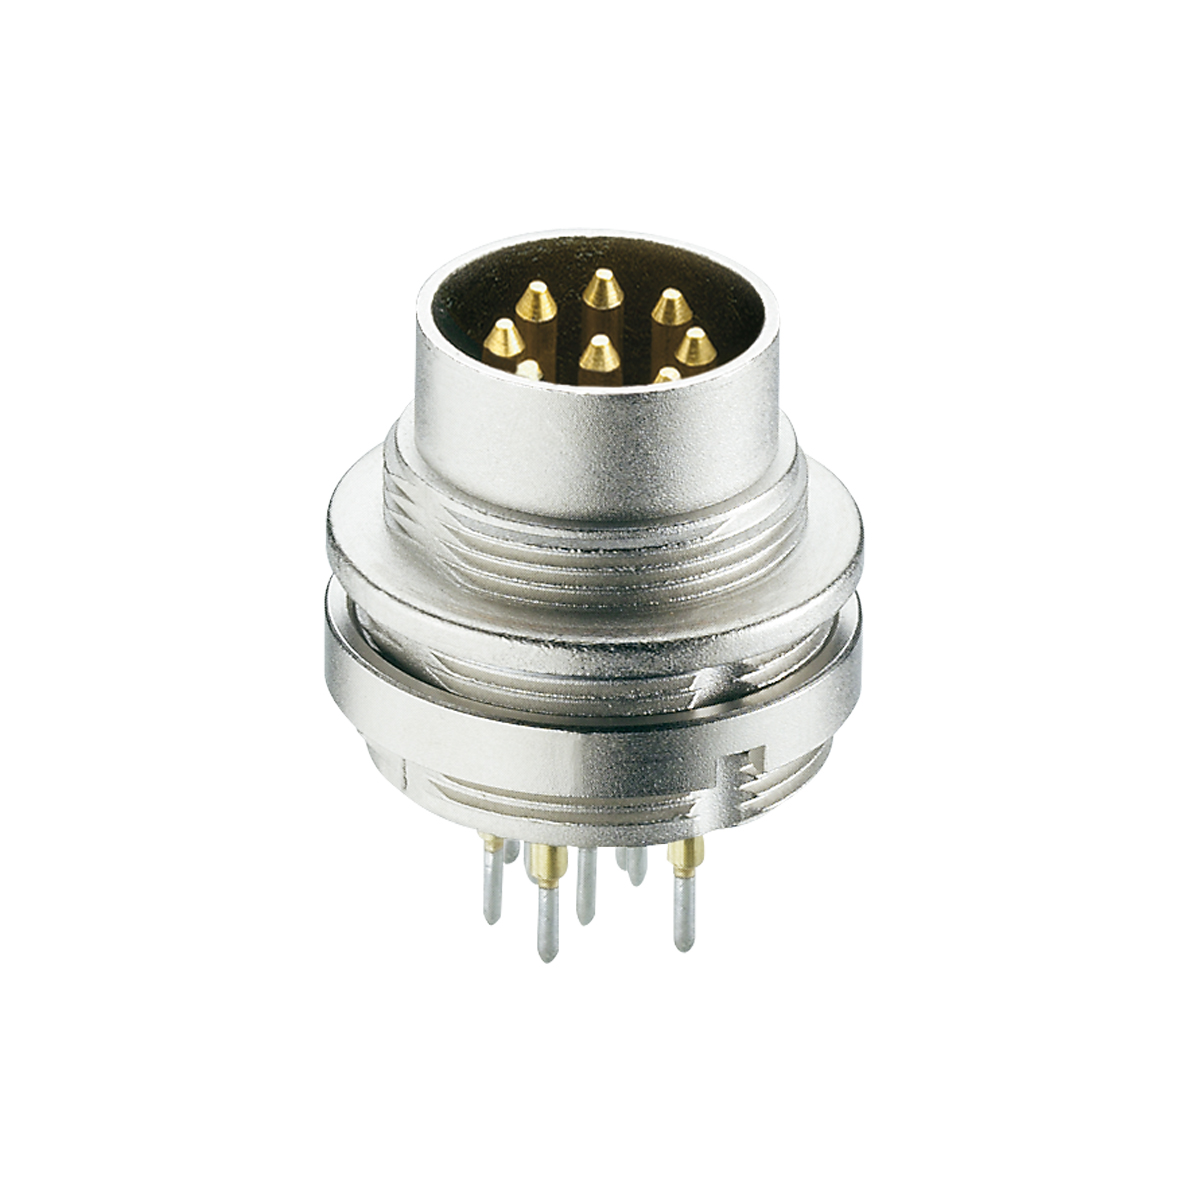 Lumberg: 0316-1 (Series 03 | Circular connectors with threaded joint M16 acc. to IEC 61076-2-106, IP40/IP68)